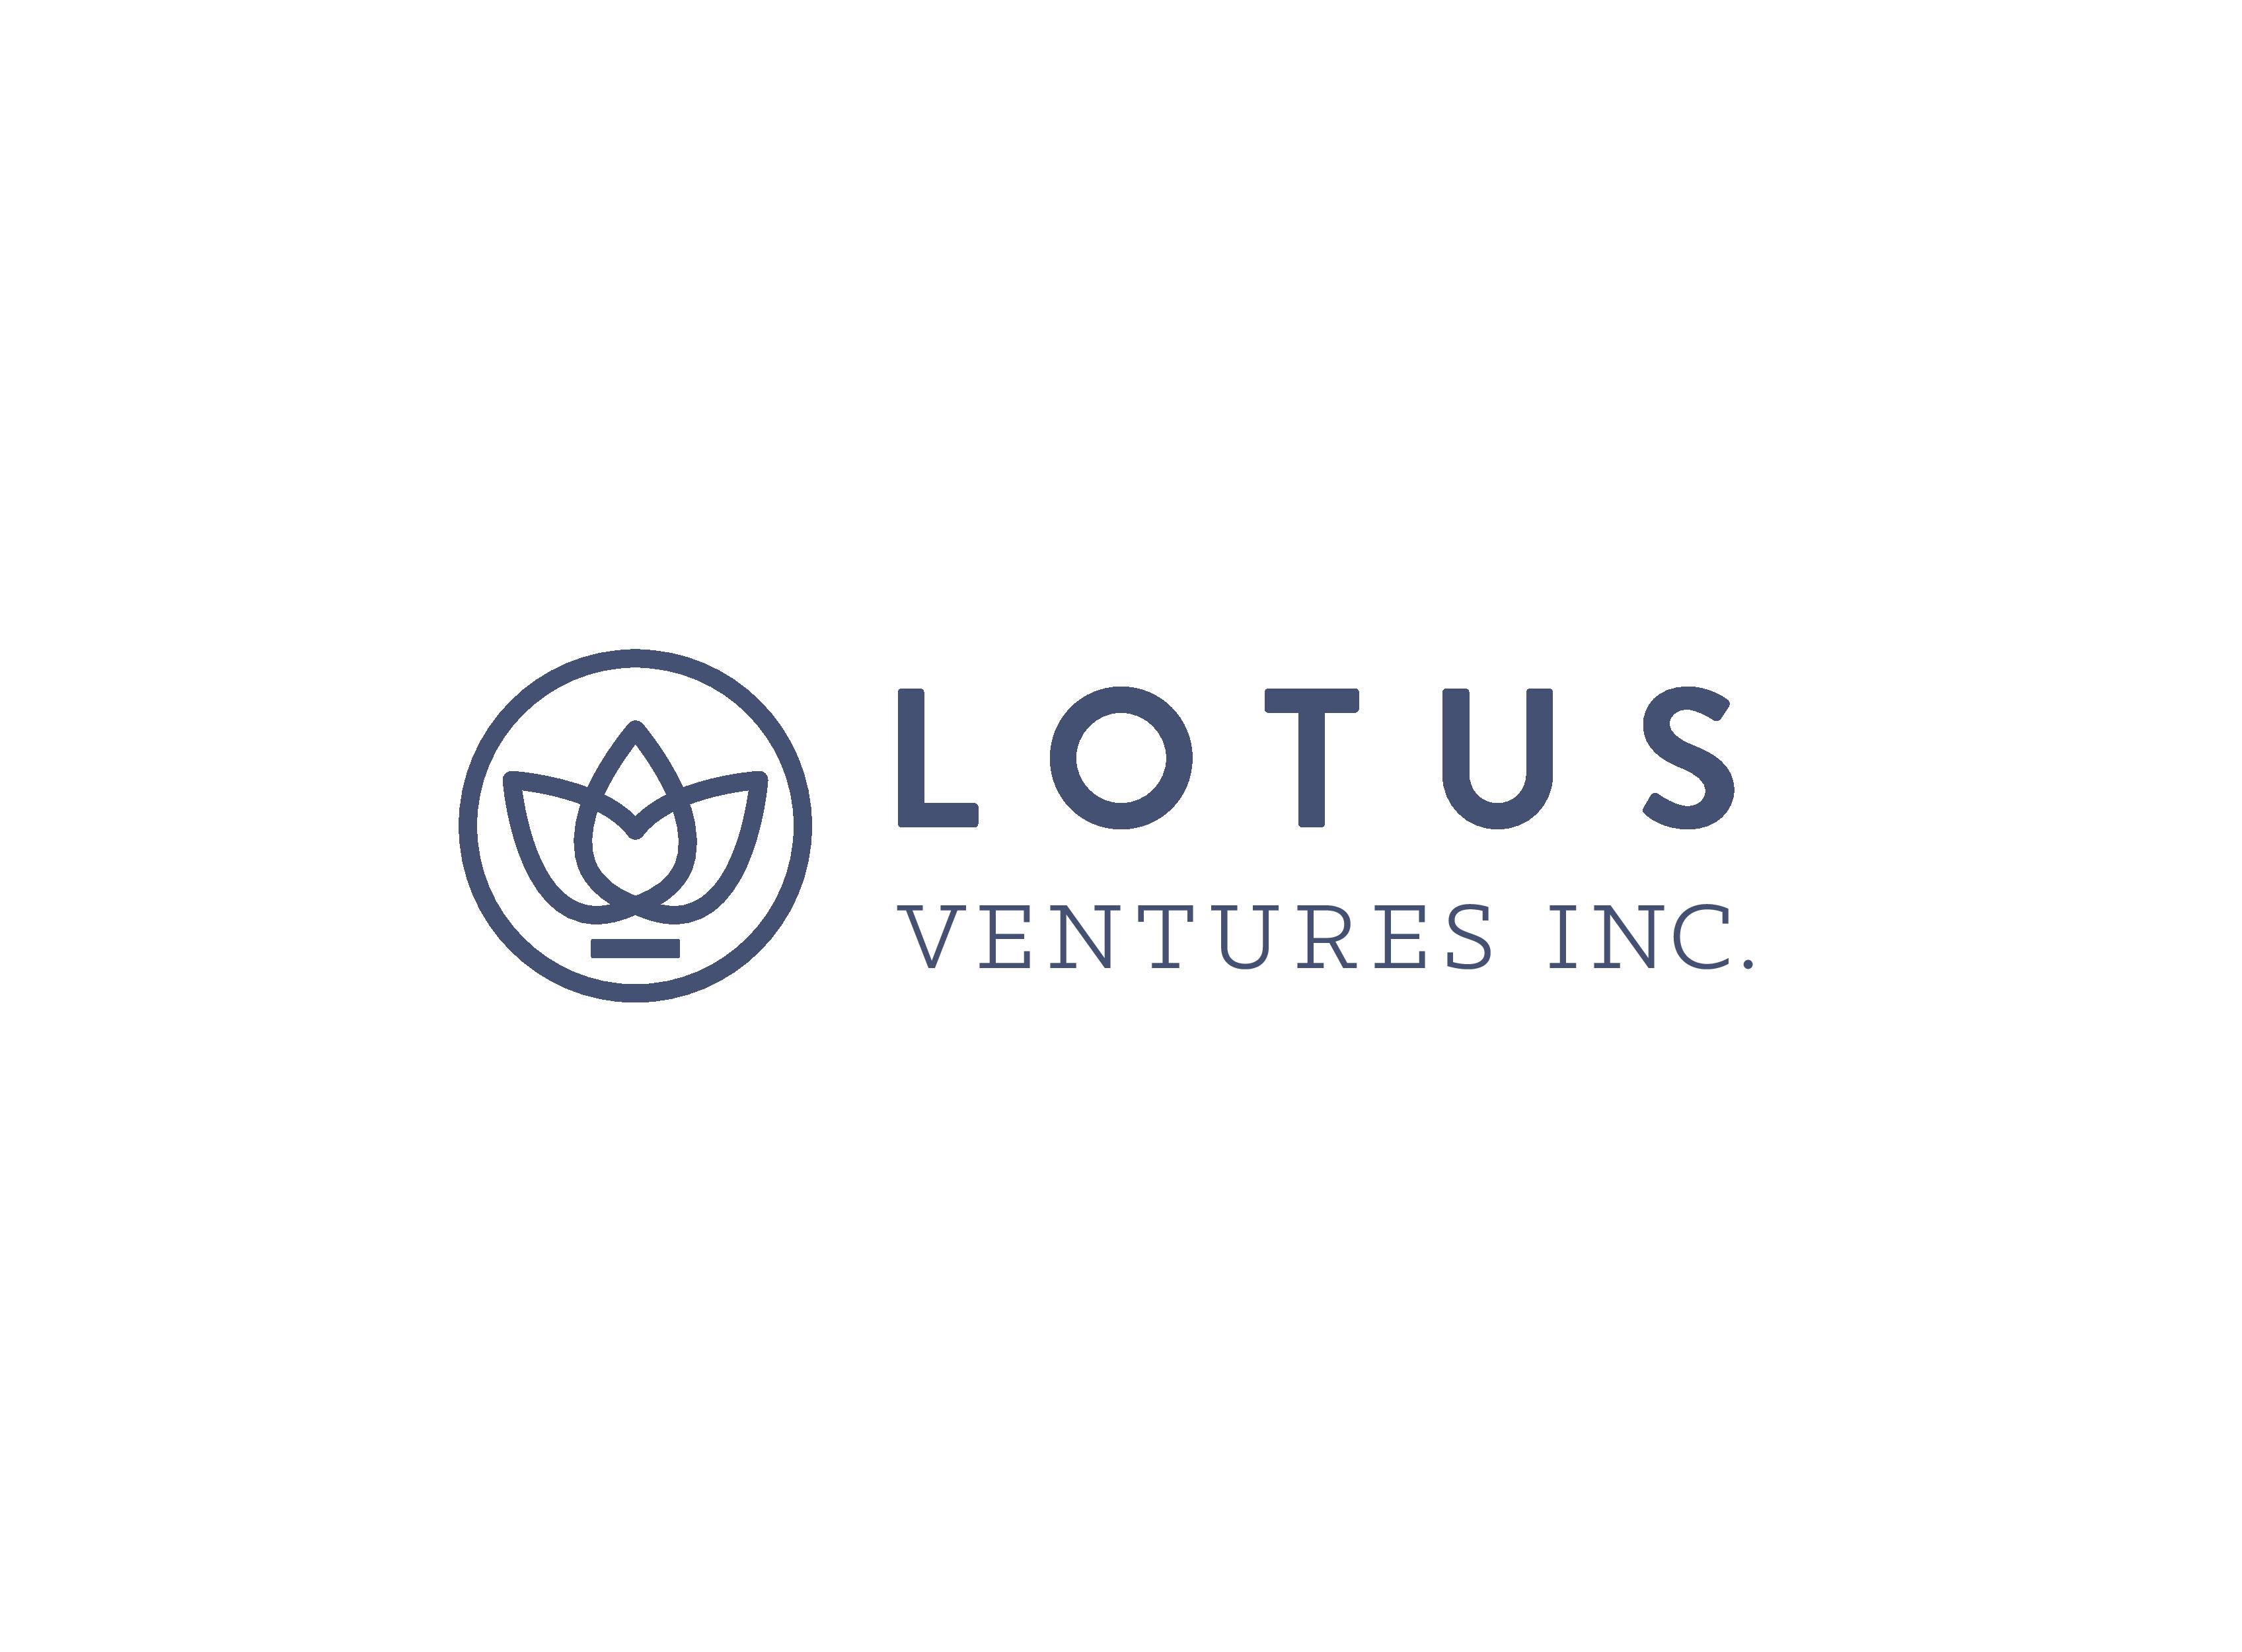 Lotus Ventures, Inc., Wednesday, July 27, 2022, Press release picture